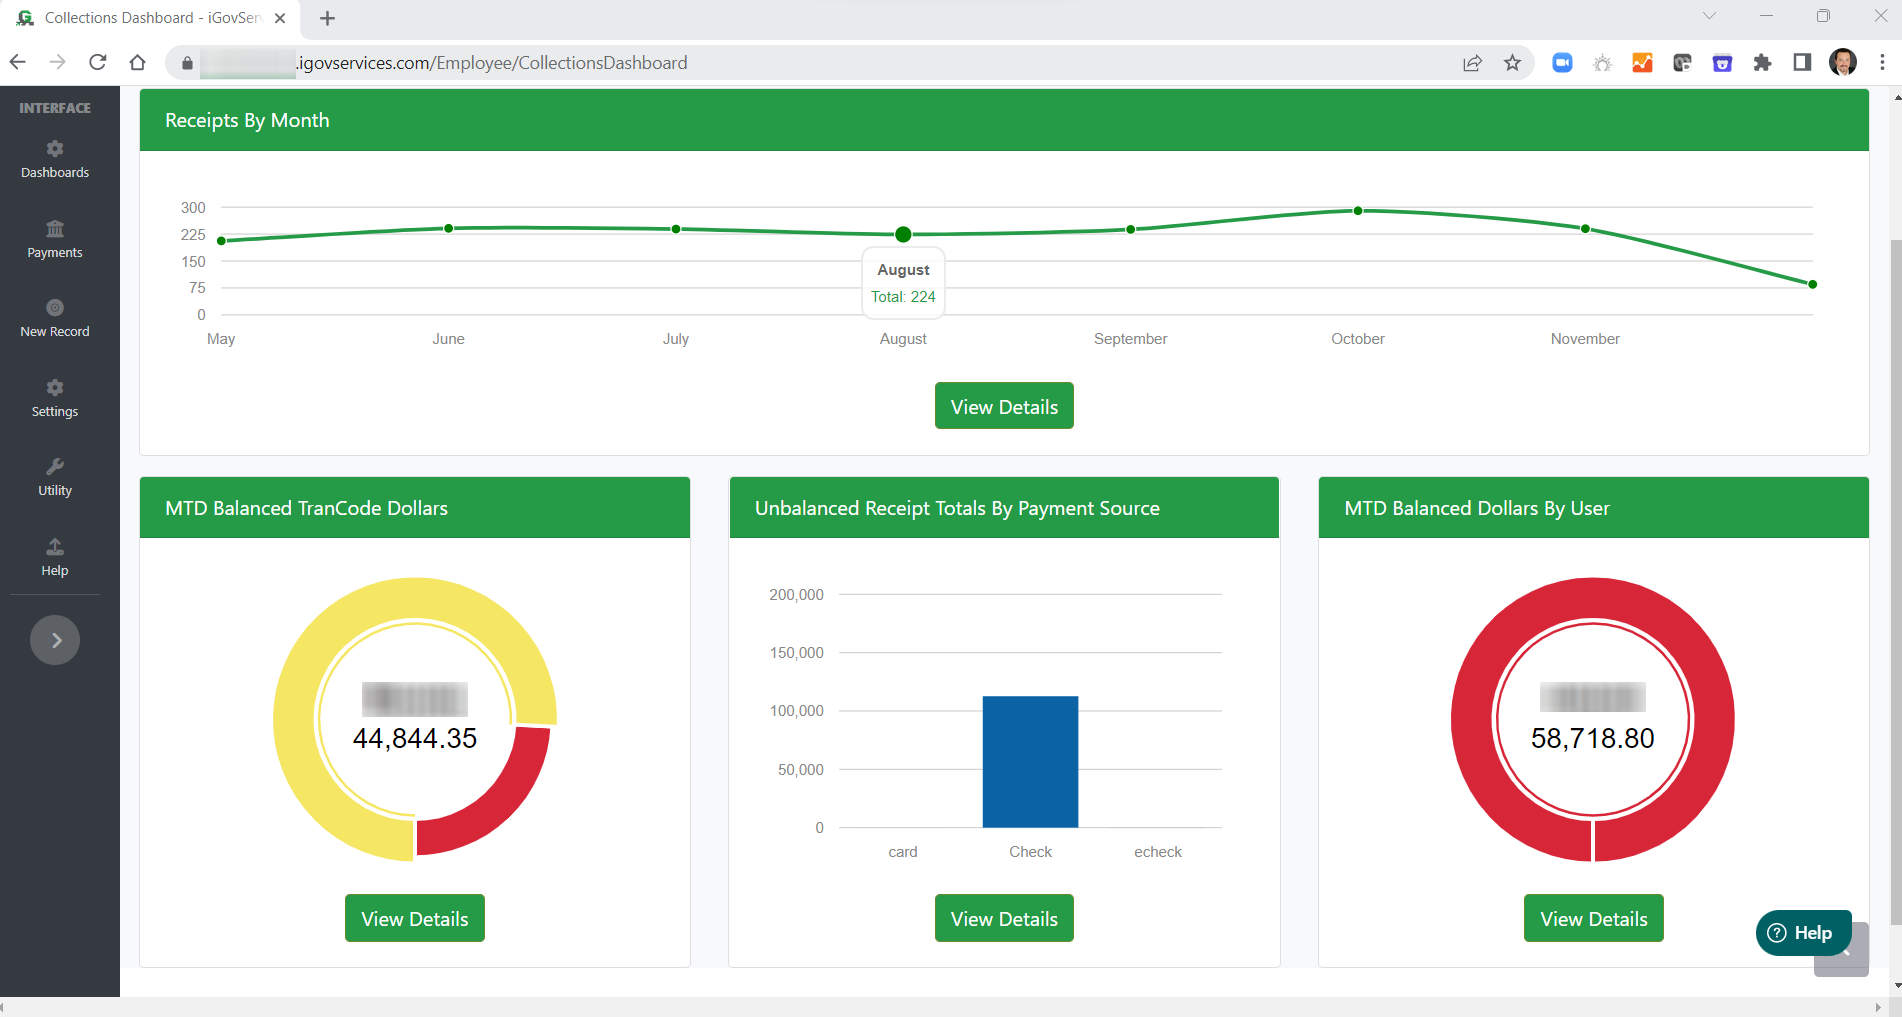 Monitor every dollar coming in through multiple entry points with iGovServices' Collections Dashboard. Access financial reports for current and prior fiscal years to make informed decisions.